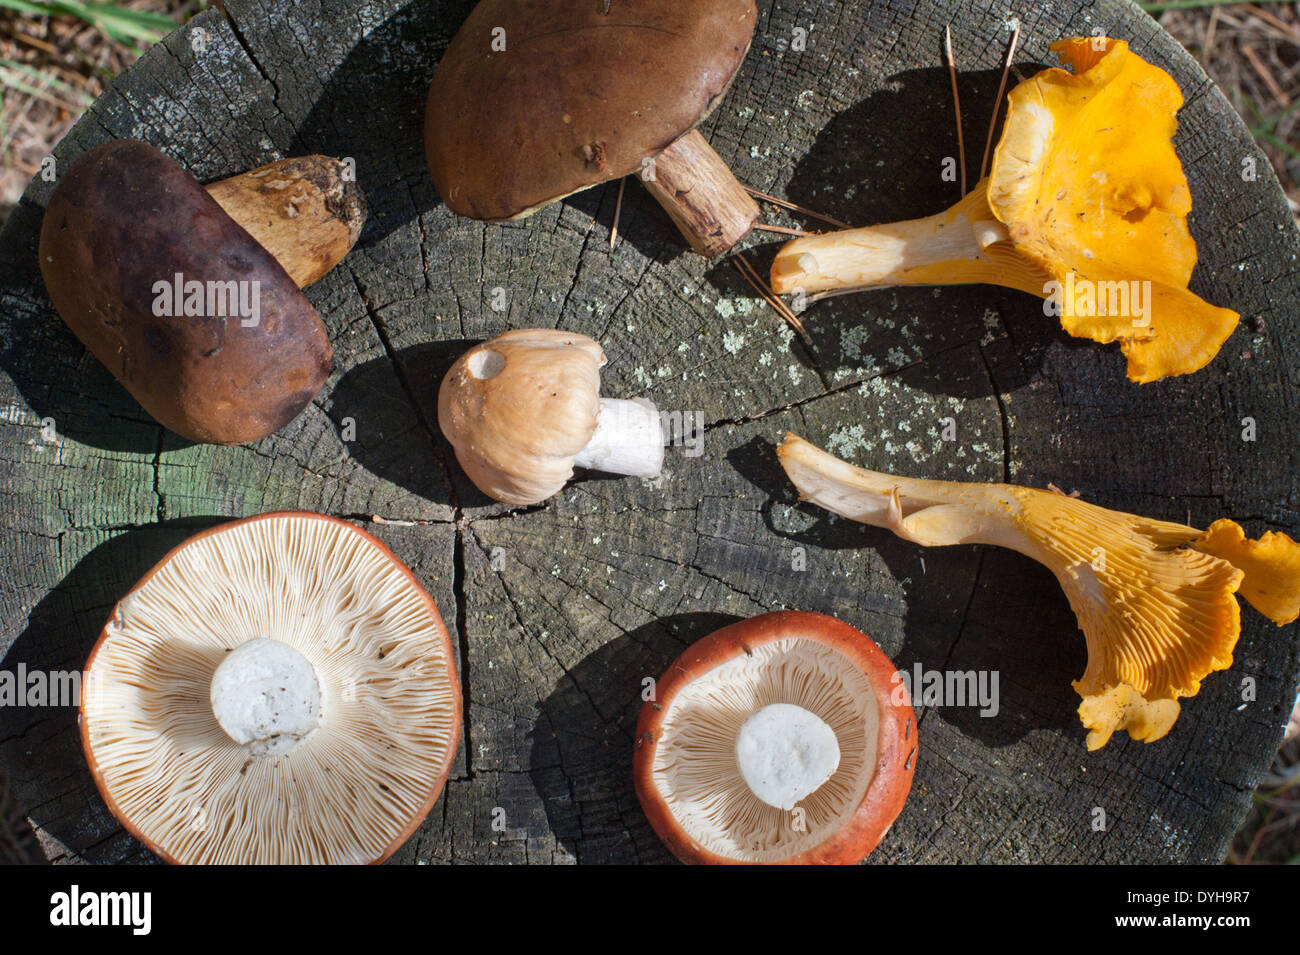 A selection of freshly picked forest mushrooms on a tree stump. Stock Photo